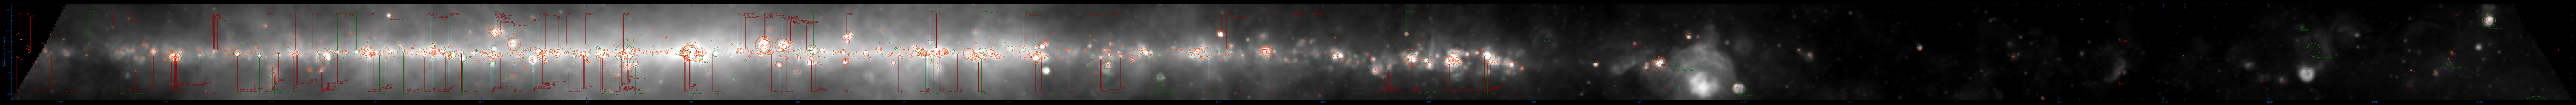 Annotated CHIPASS Galactic Plane image.